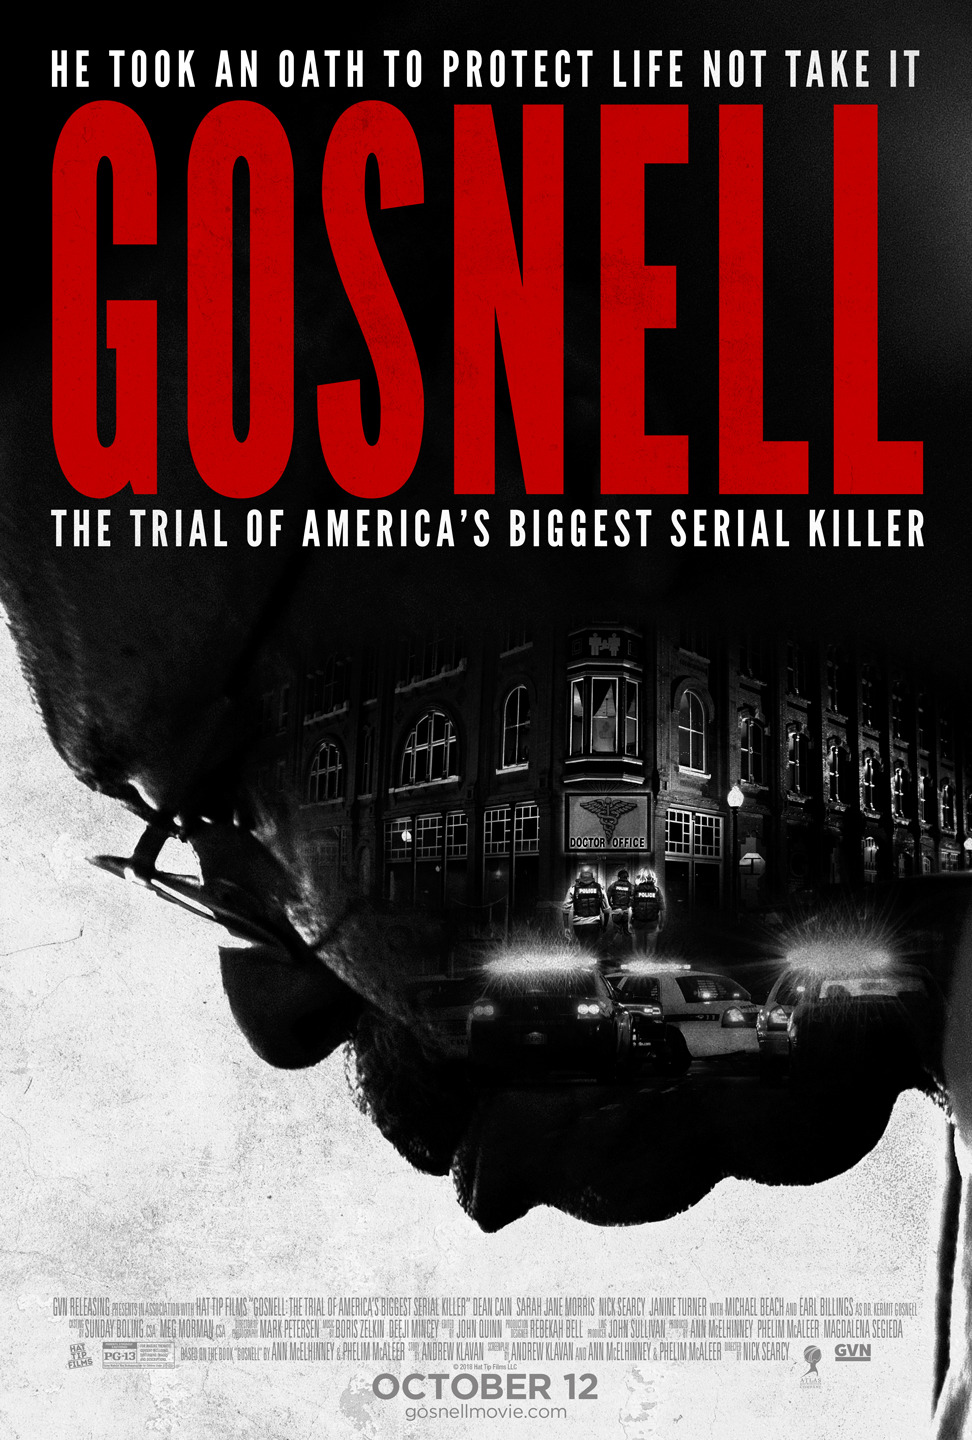 Extra Large Movie Poster Image for Gosnell: The Trial of America's Biggest Serial Killer (#2 of 2)